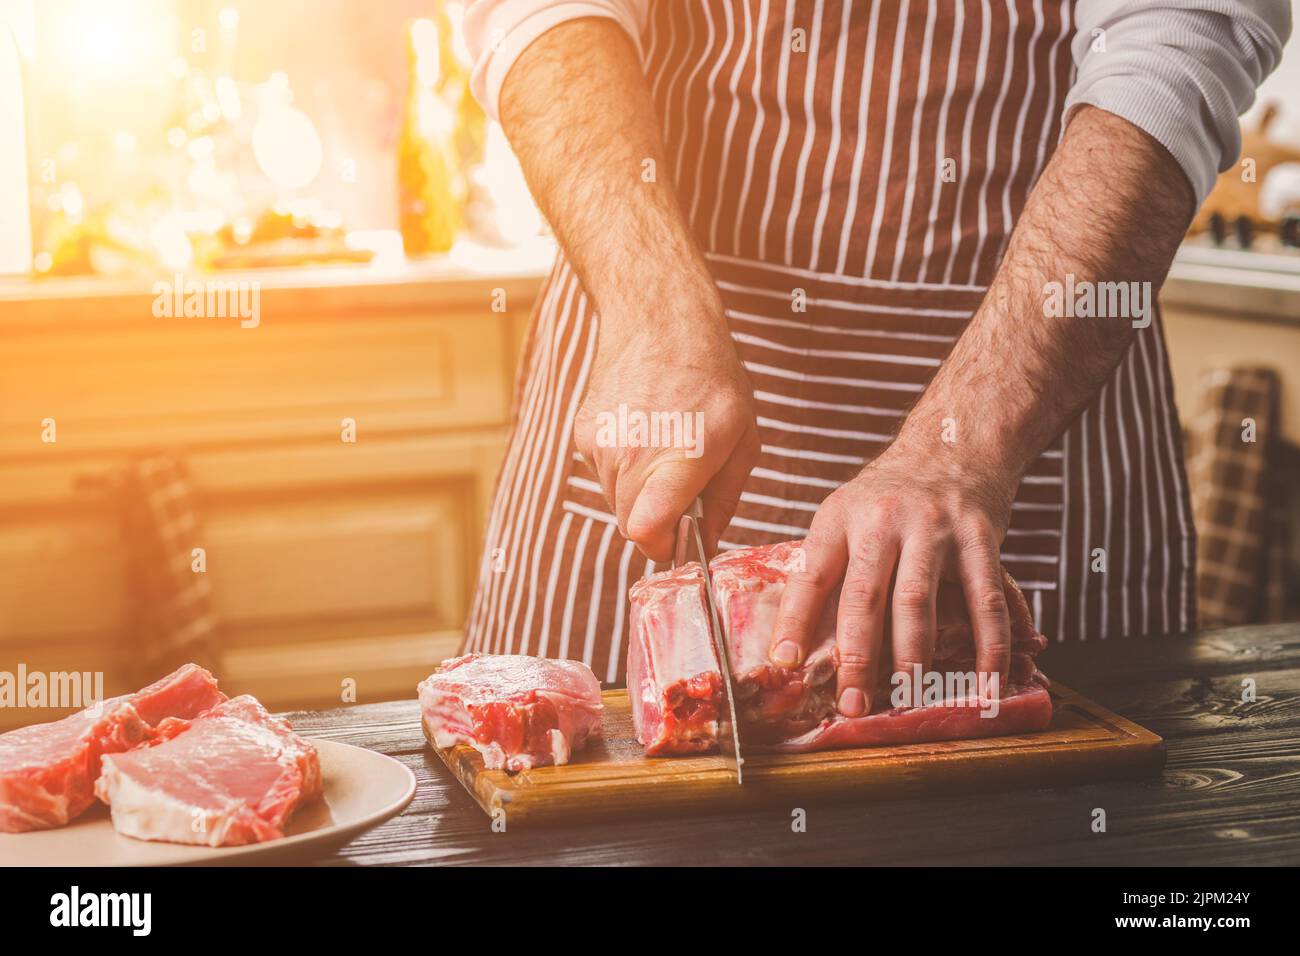 https://c8.alamy.com/comp/2JPM24Y/man-cuts-of-fresh-piece-of-beef-on-a-wooden-cutting-board-in-the-home-kitchen-2JPM24Y.jpg